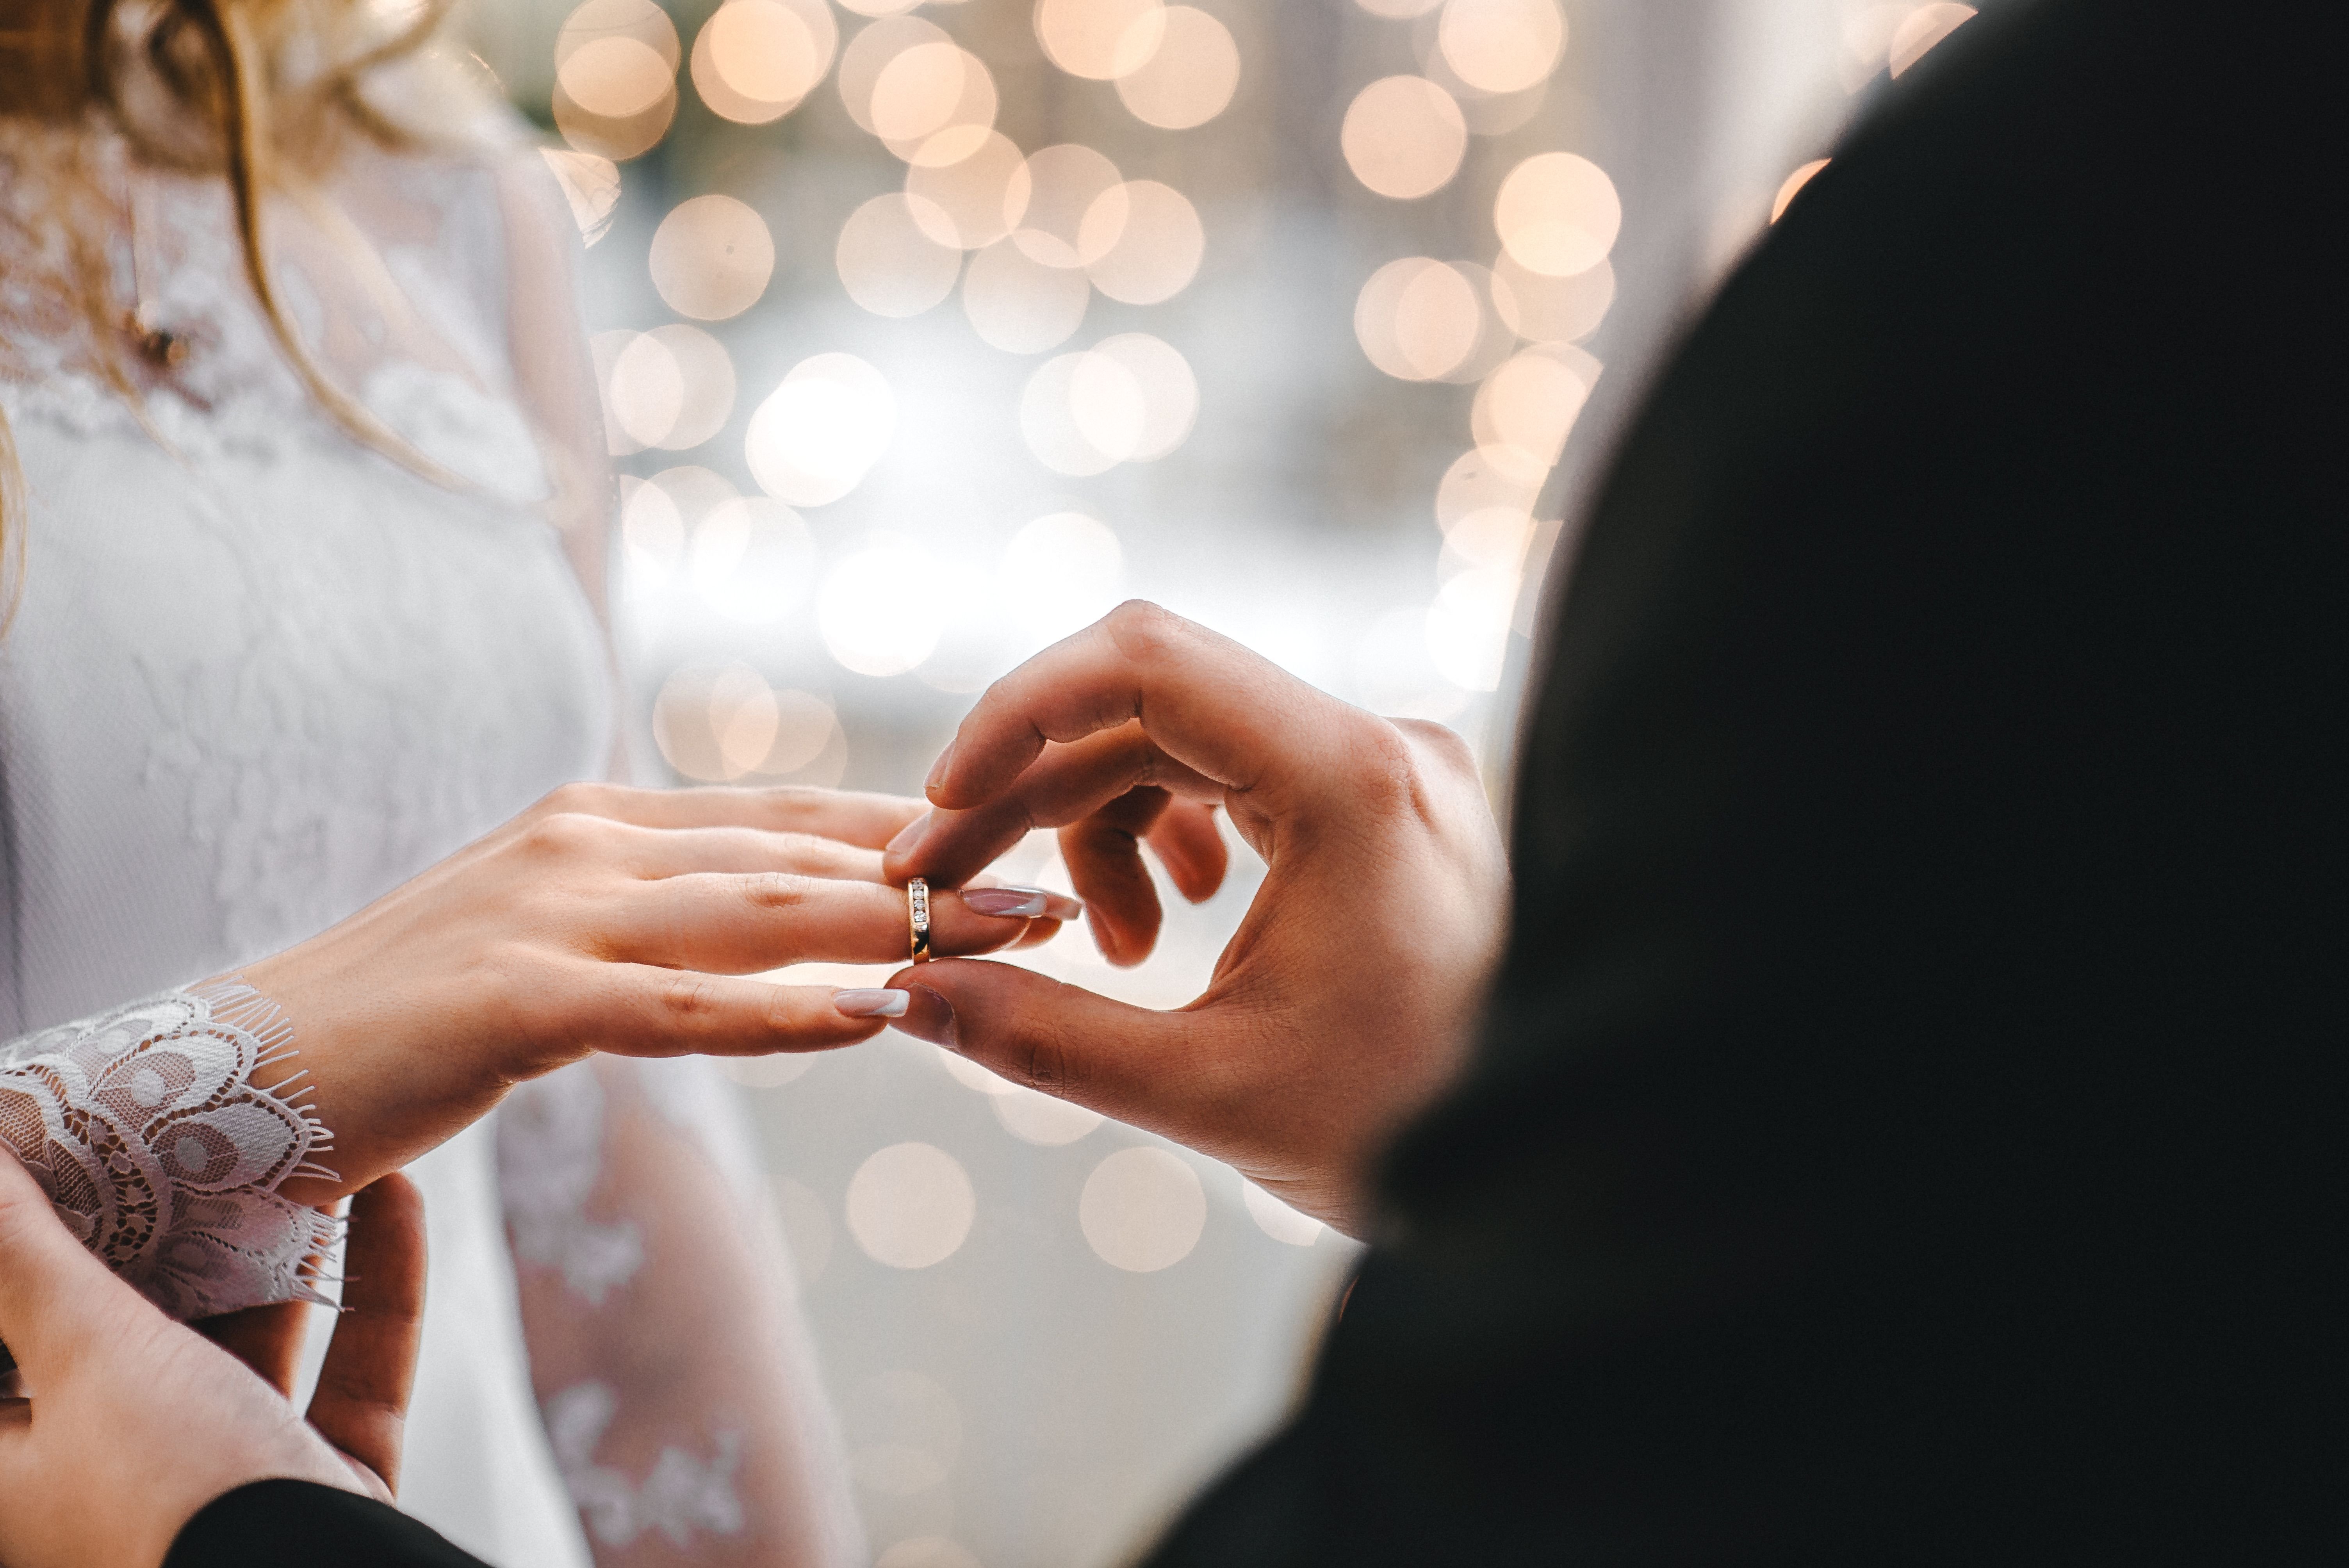 A groom placing a wedding ring on his bride's finger. | Source: Shutterstock 